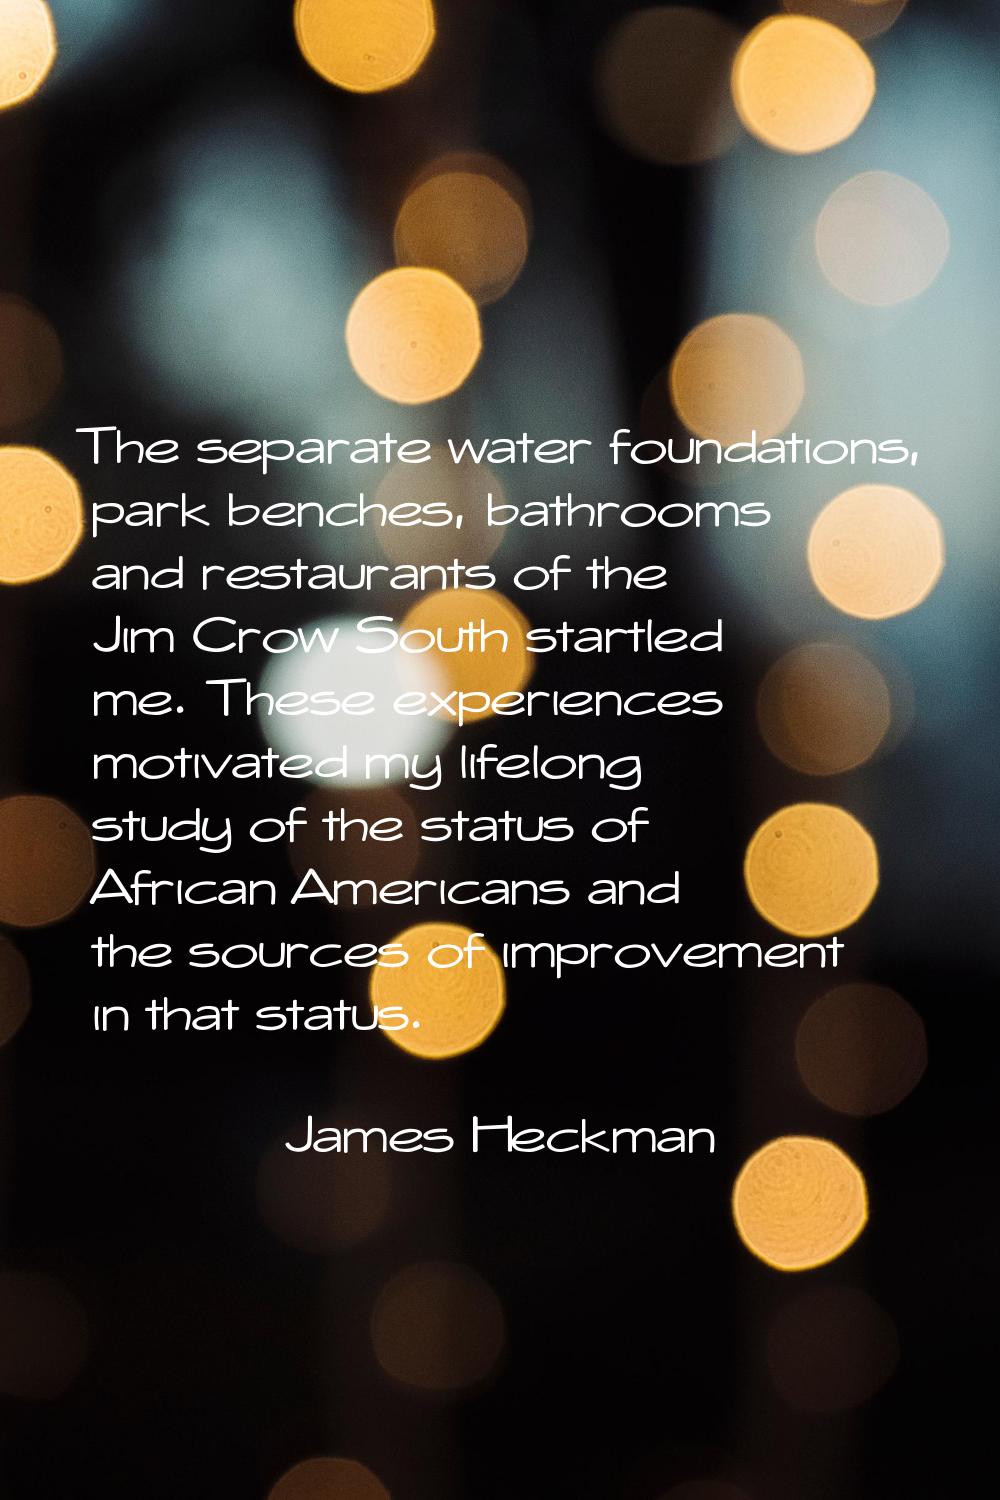 The separate water foundations, park benches, bathrooms and restaurants of the Jim Crow South start